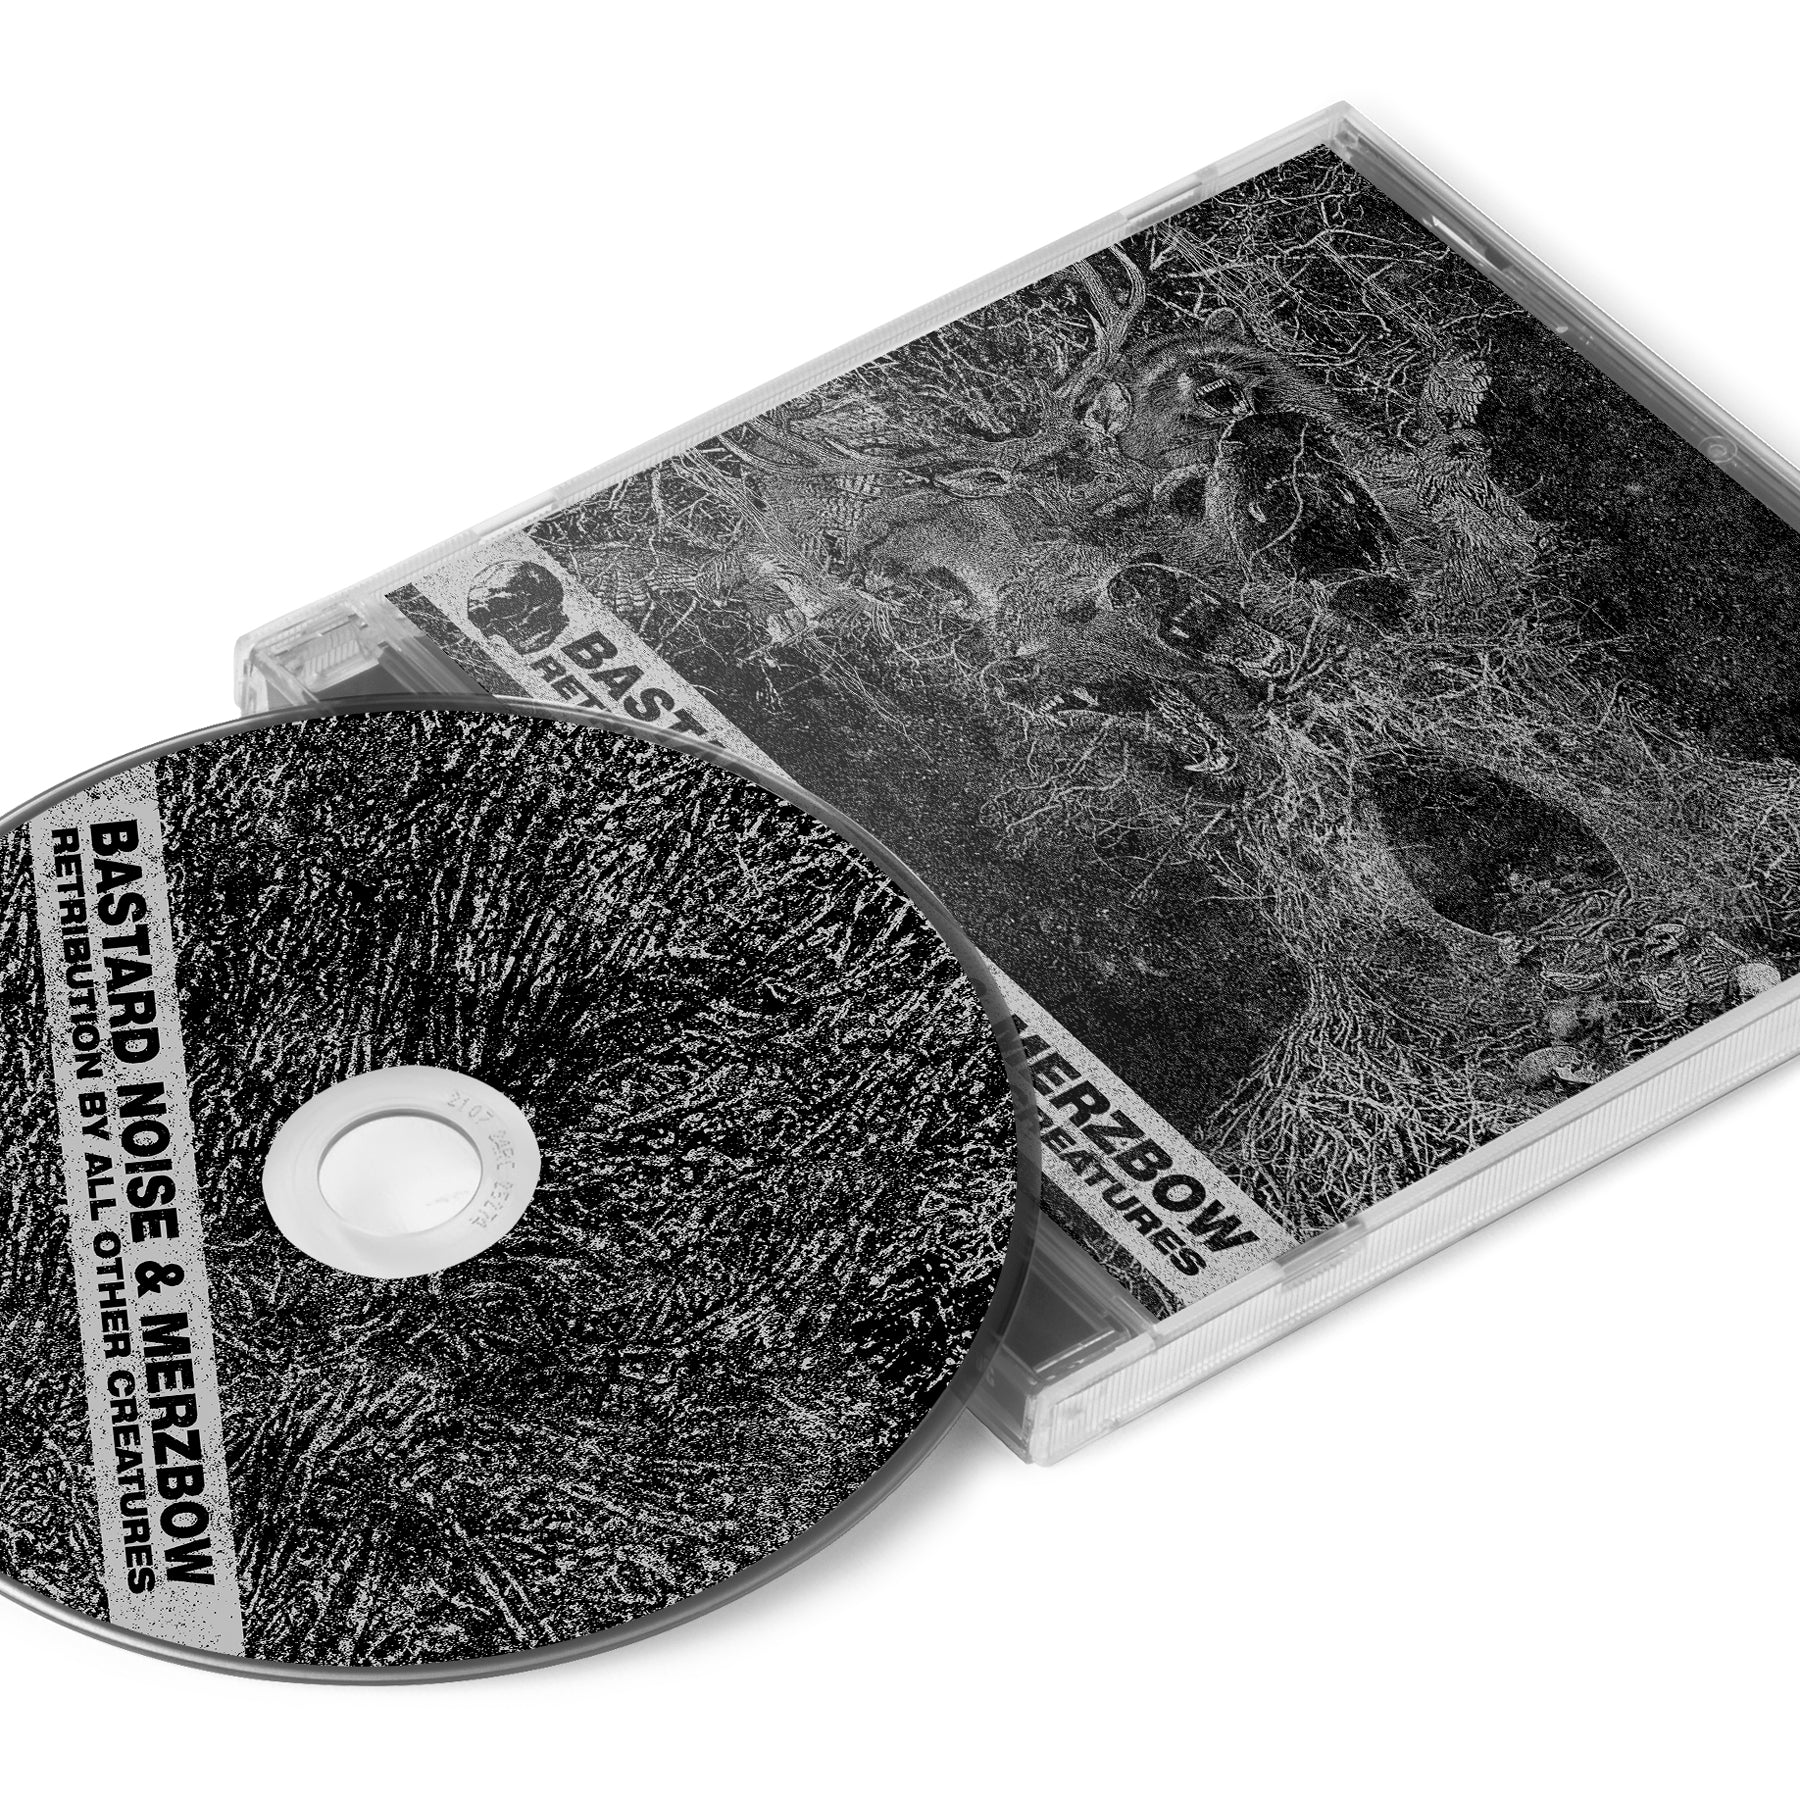 Bastard Noise / Merzbow "RETRIBUTION BY ALL OTHER CREATURES" CD